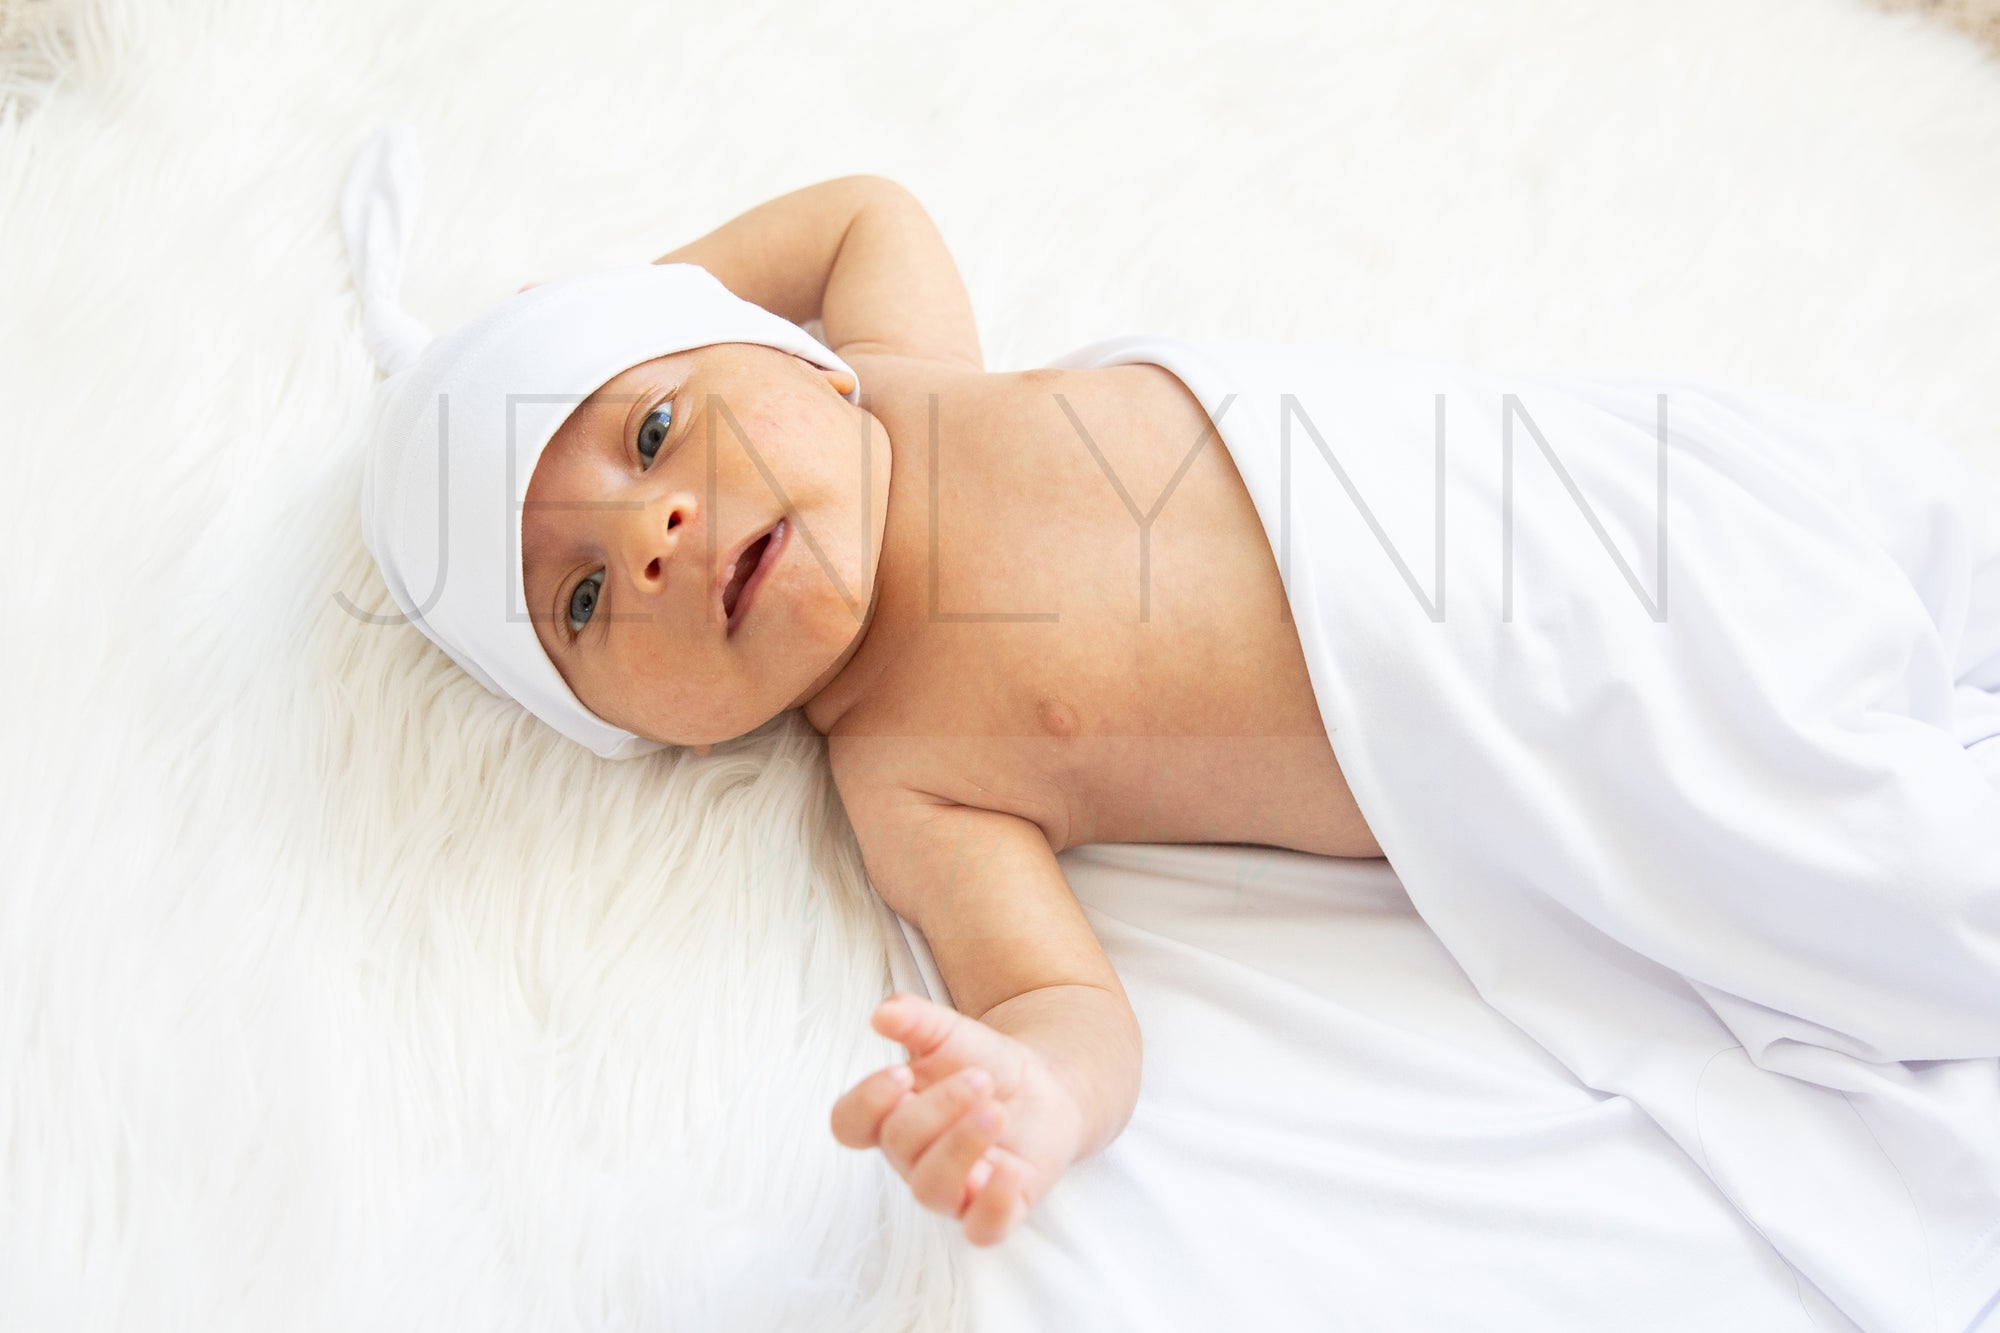 Stretch Jersey Blanket with knotted hat on baby Mockup #BL10 PSD